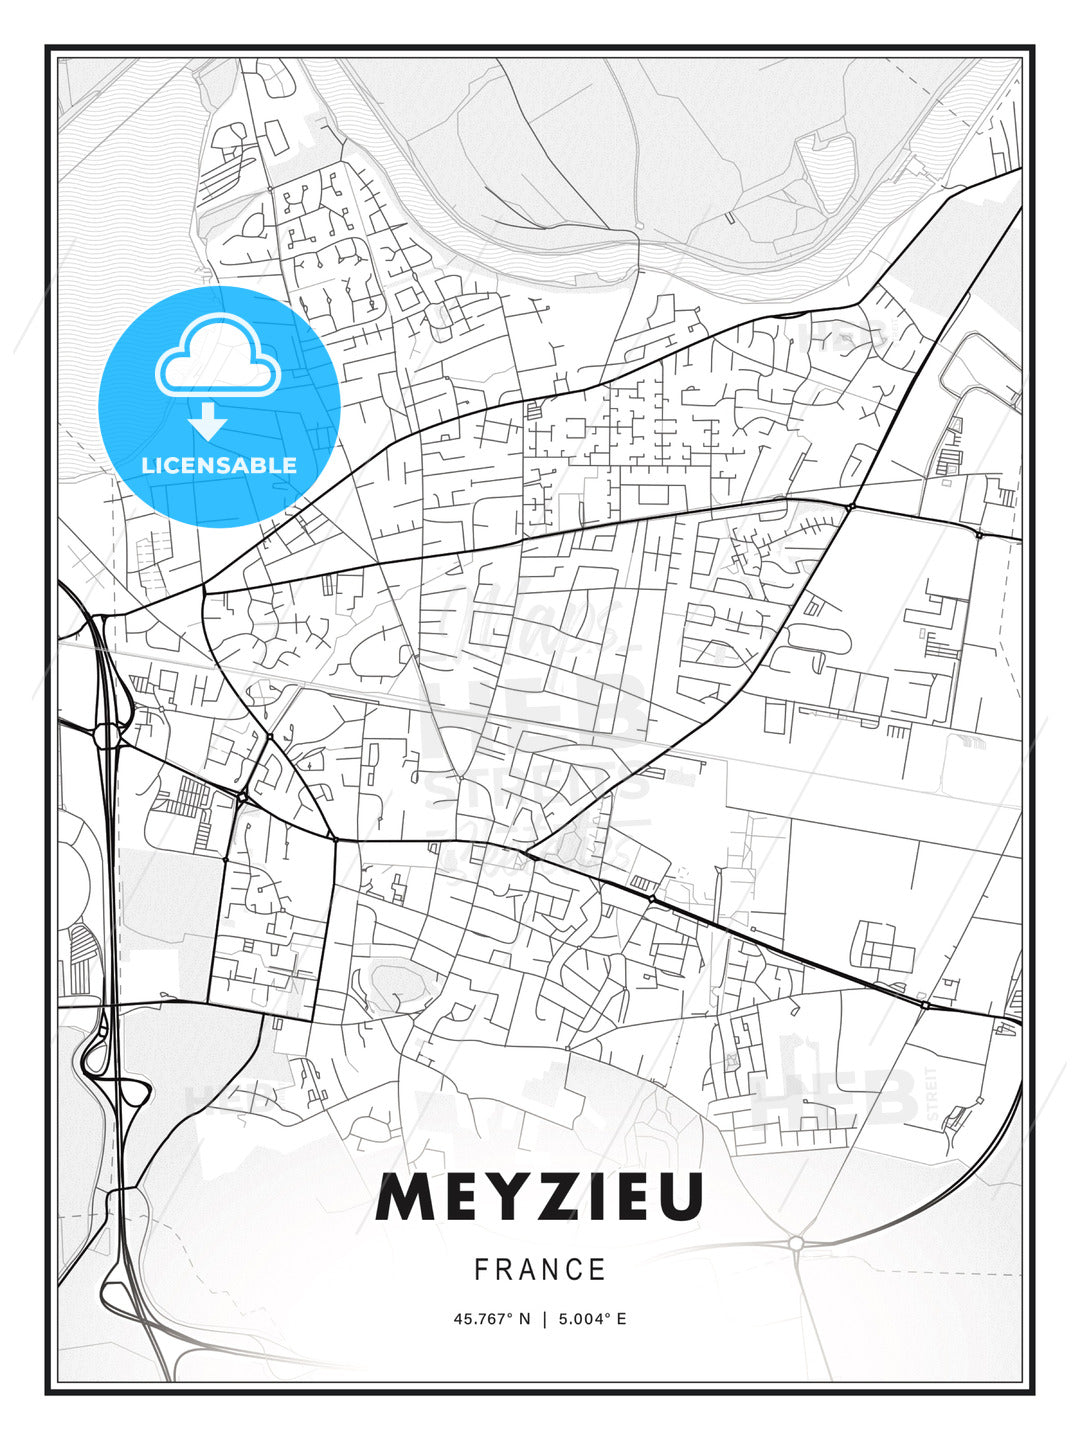 Meyzieu, France, Modern Print Template in Various Formats - HEBSTREITS Sketches